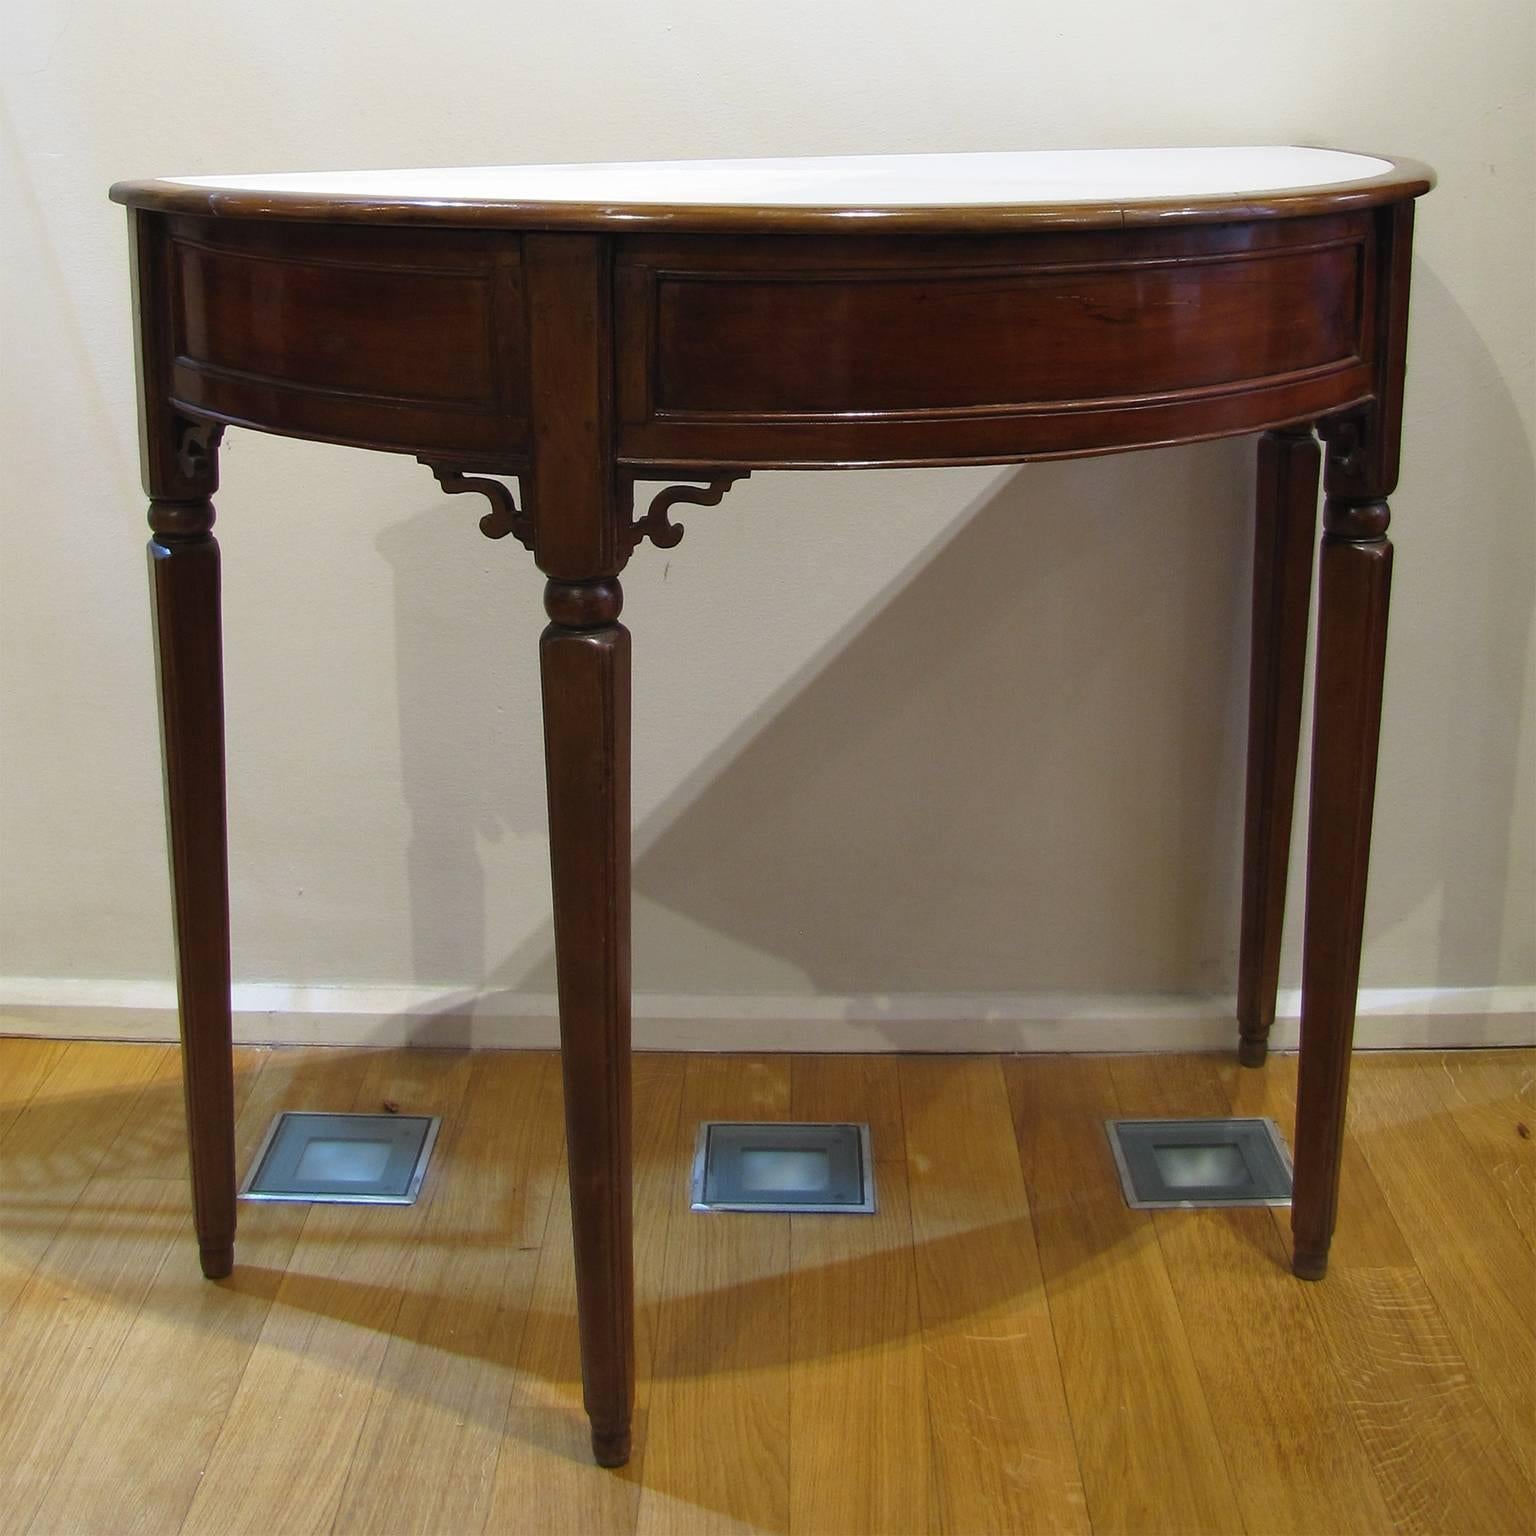 Two Italian Mid-19th Century Side Tables in Mahogany Wood with White Marble Top In Good Condition For Sale In Firenze, IT